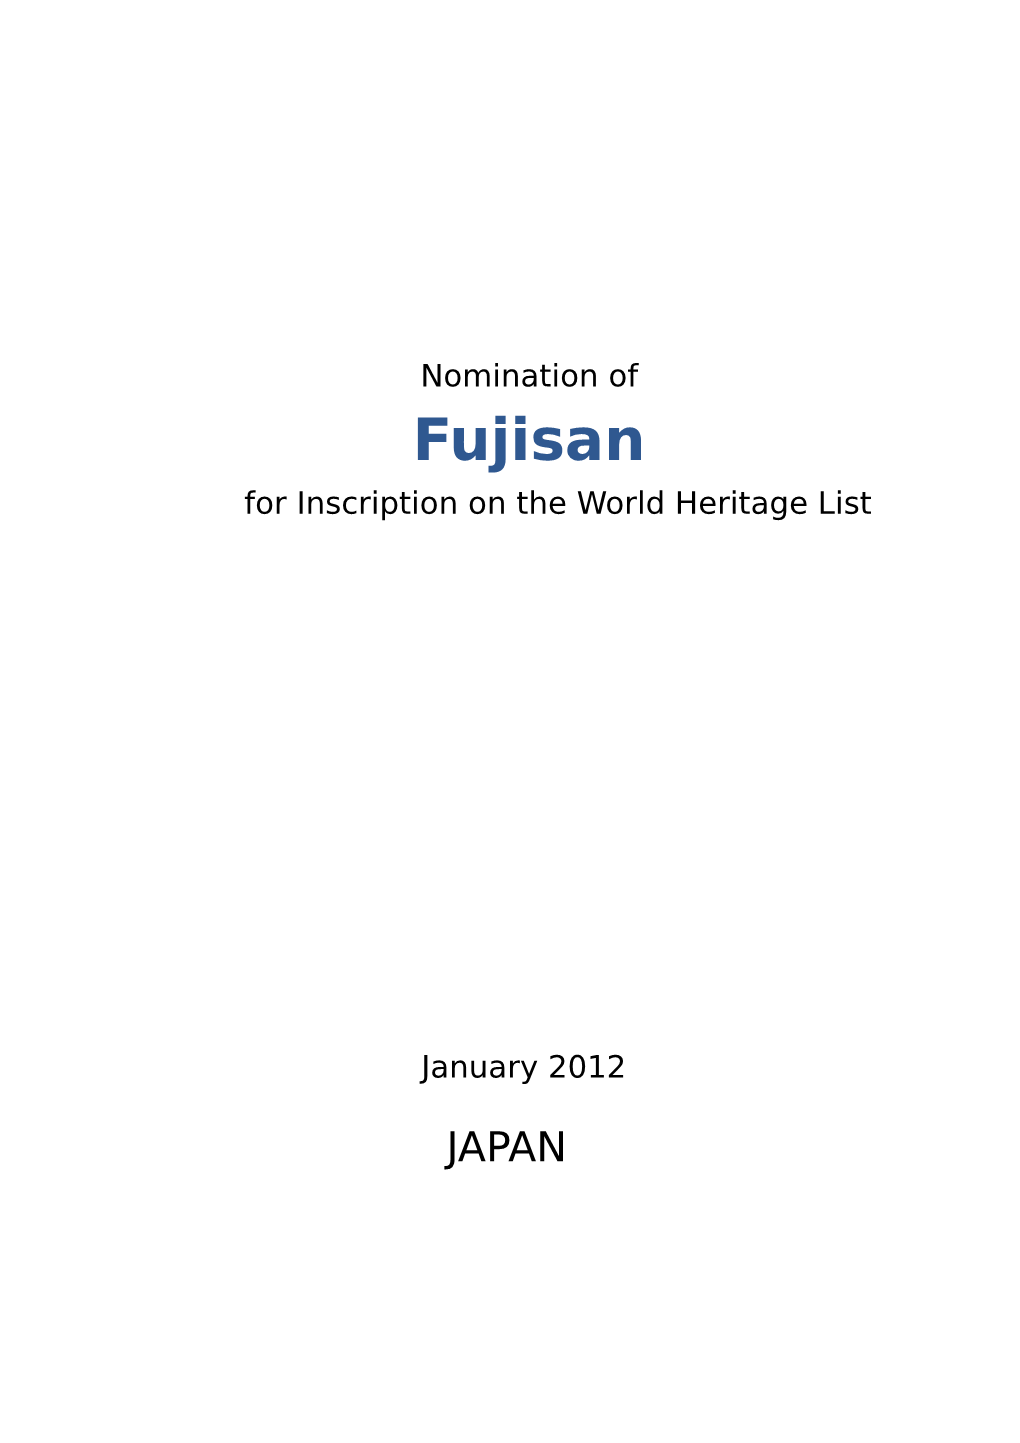 Nomination of Fujisan for Inscription on the World Heritage List